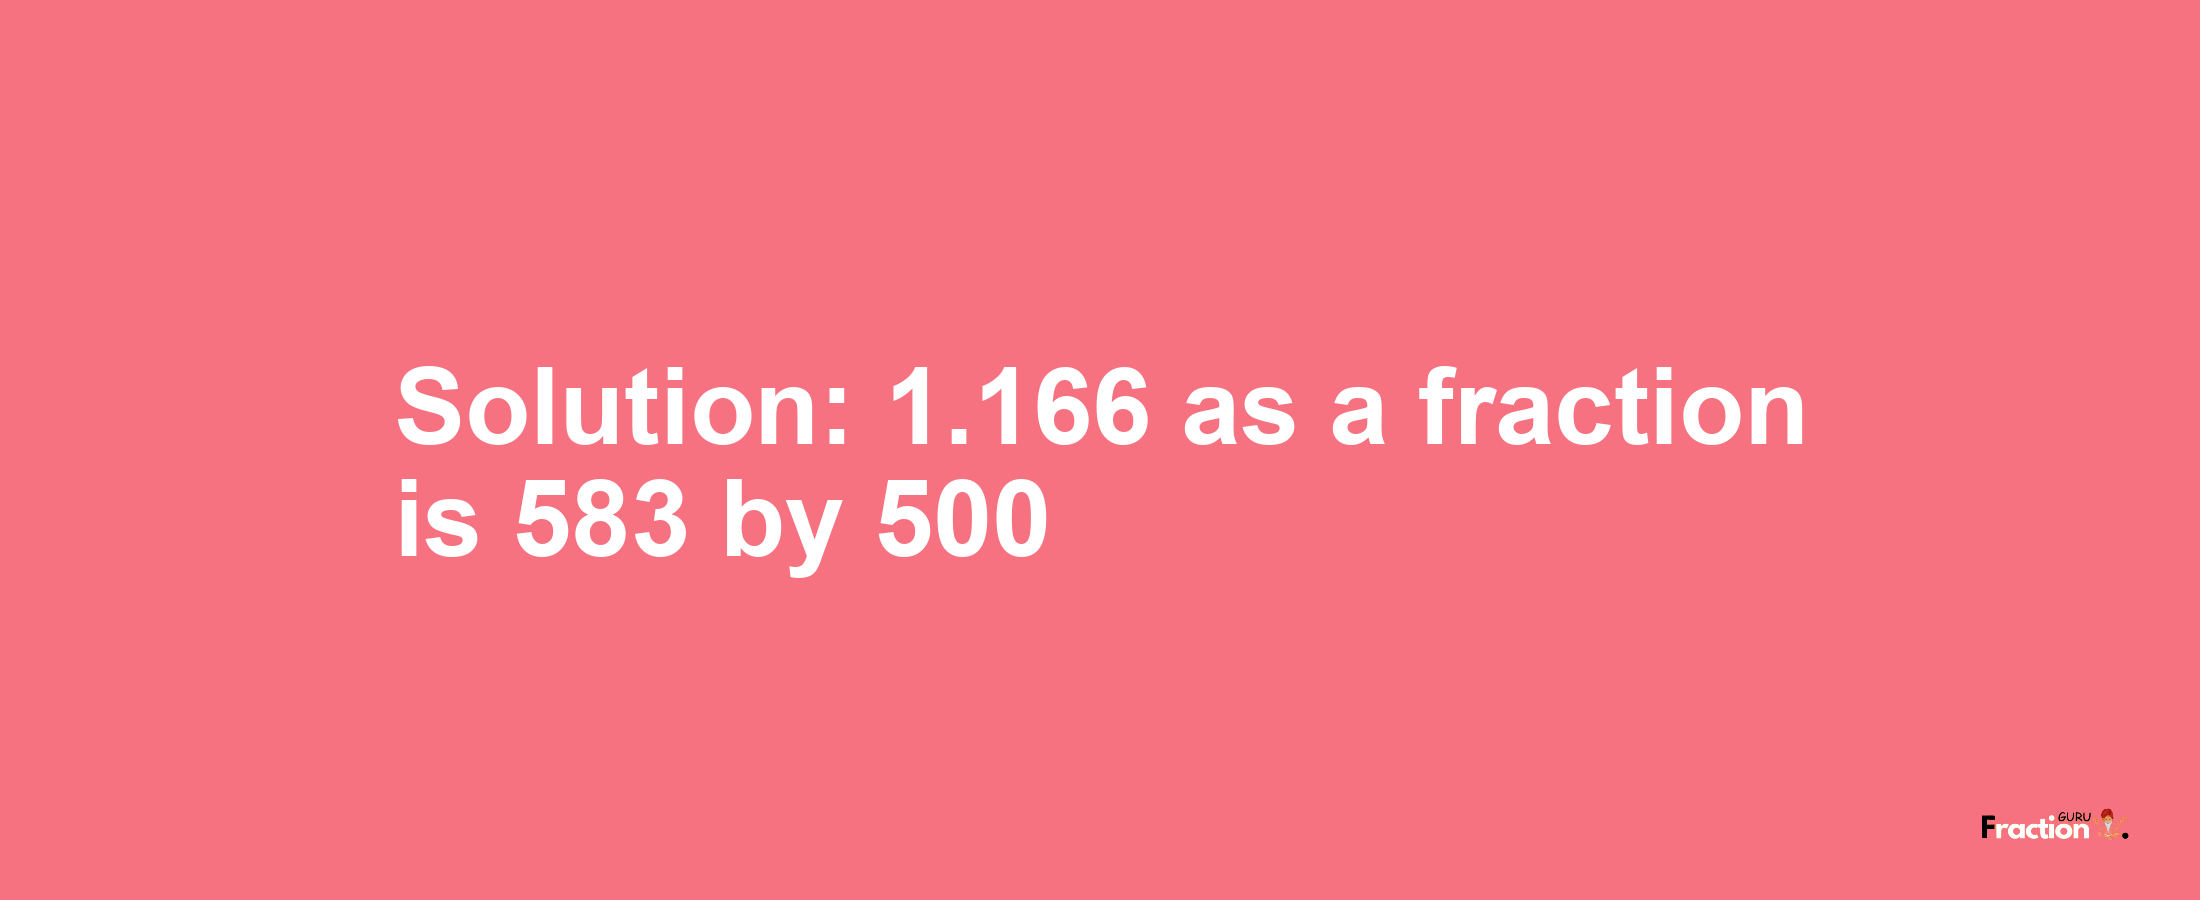 Solution:1.166 as a fraction is 583/500